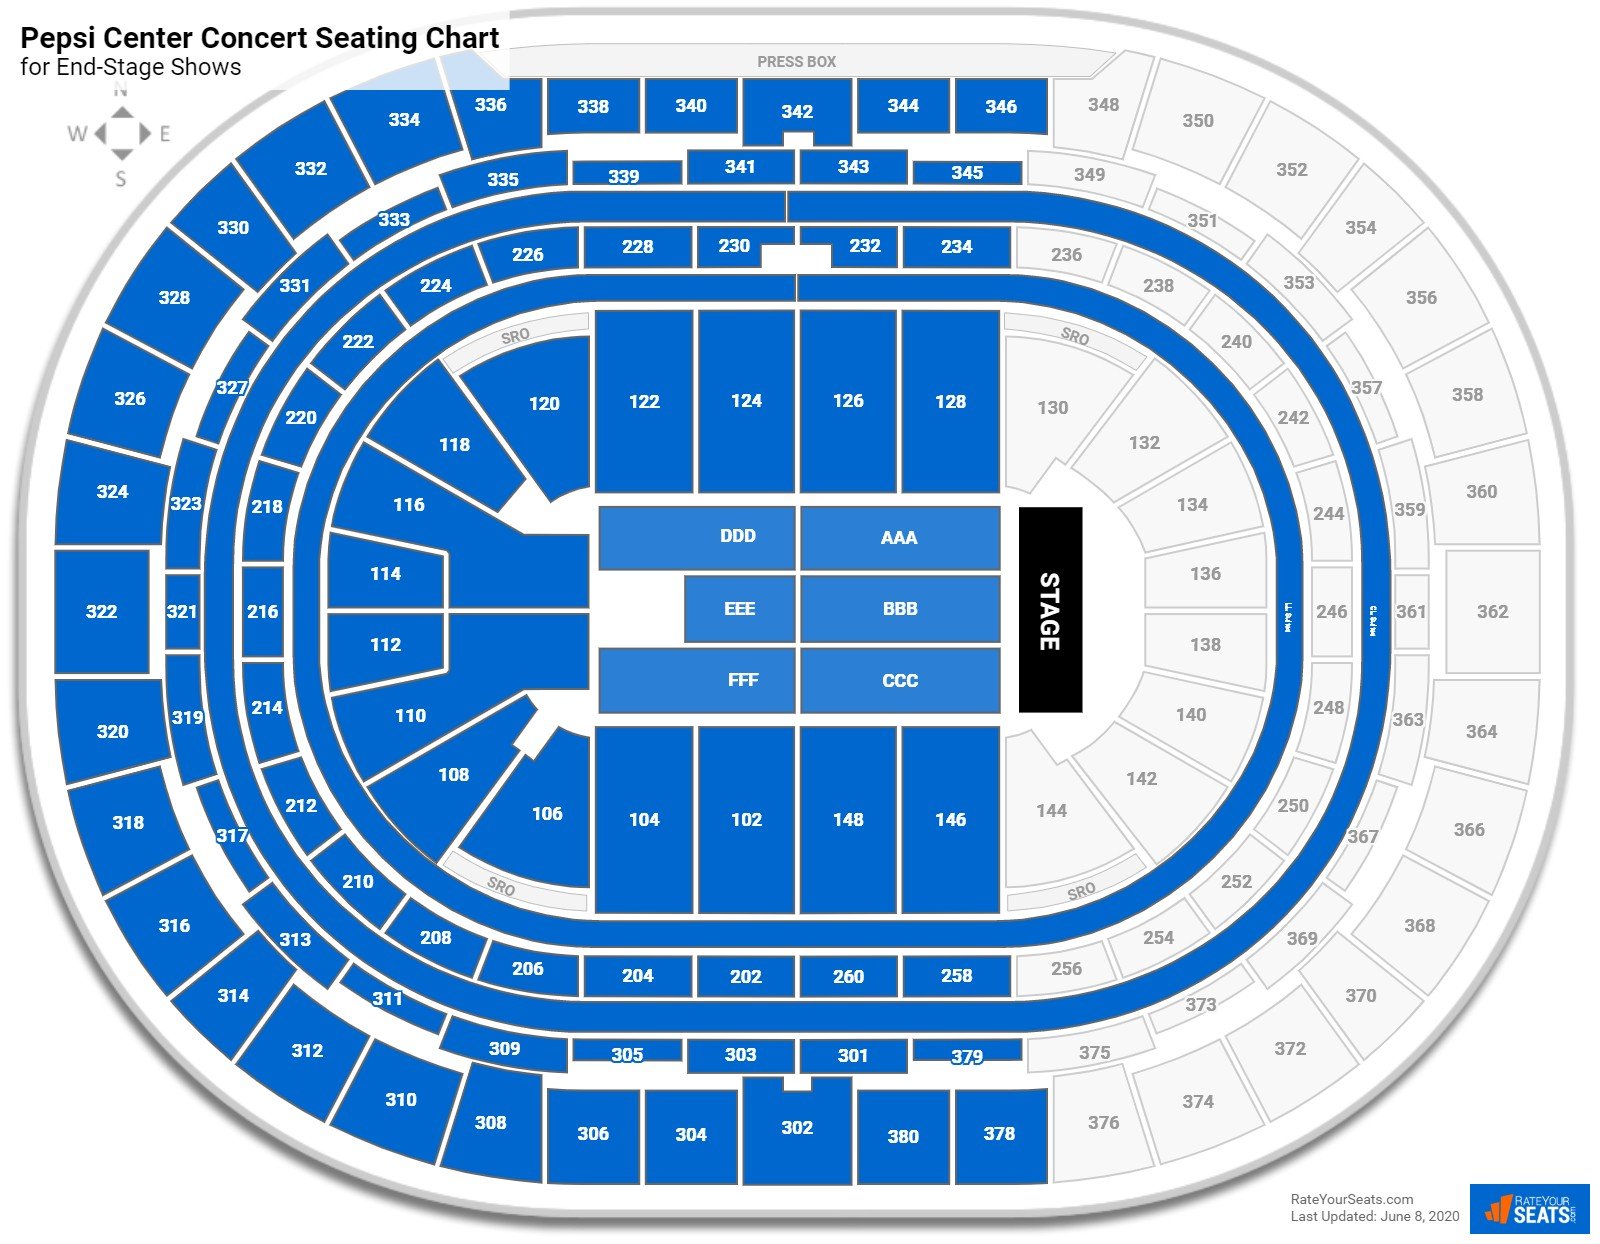 Pepsi Center Section 126 Concert Seating